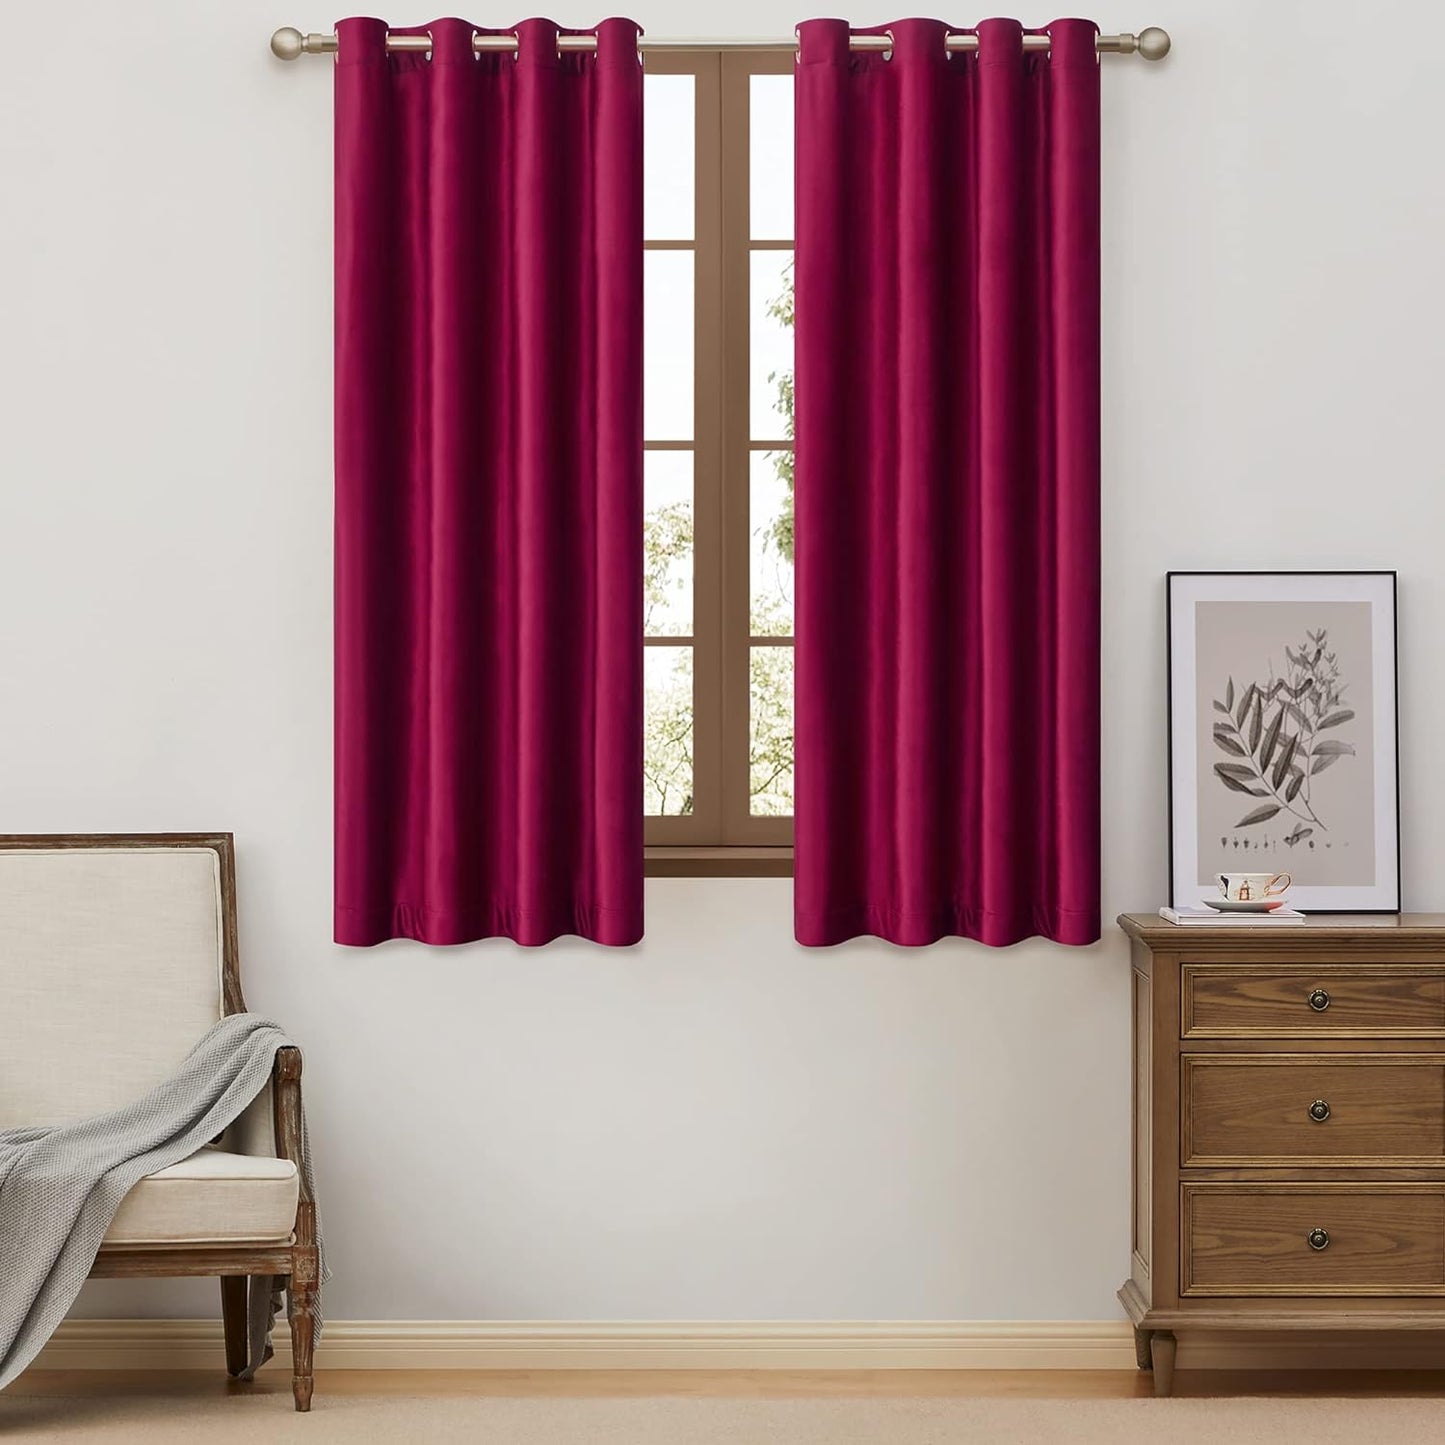 BULBUL Living Room Velvet Window Curtains 84 Inch Length- 2 Panels Hot Pink Blackout Window Drapes Curtains Thermal Insulated Room Darkening Decor Grommet Curtains for Bedroom  BULBUL Ruby Red 52"W X 63"L 